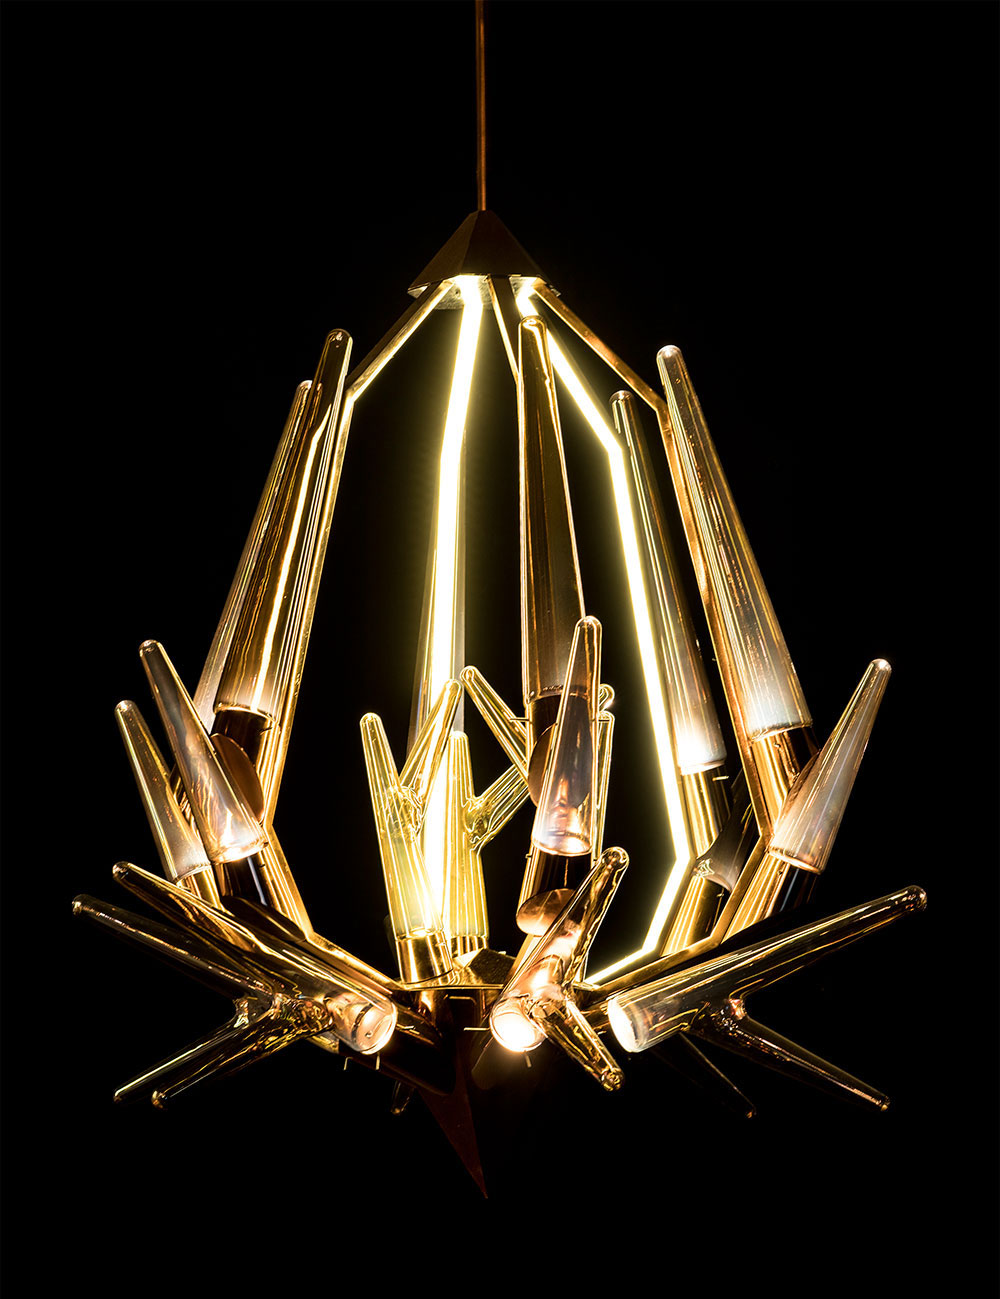 The Stag chandelier by New Delhi-based Klove Studio, inspired by the Nordic Antelope - hand crafted in glass. 